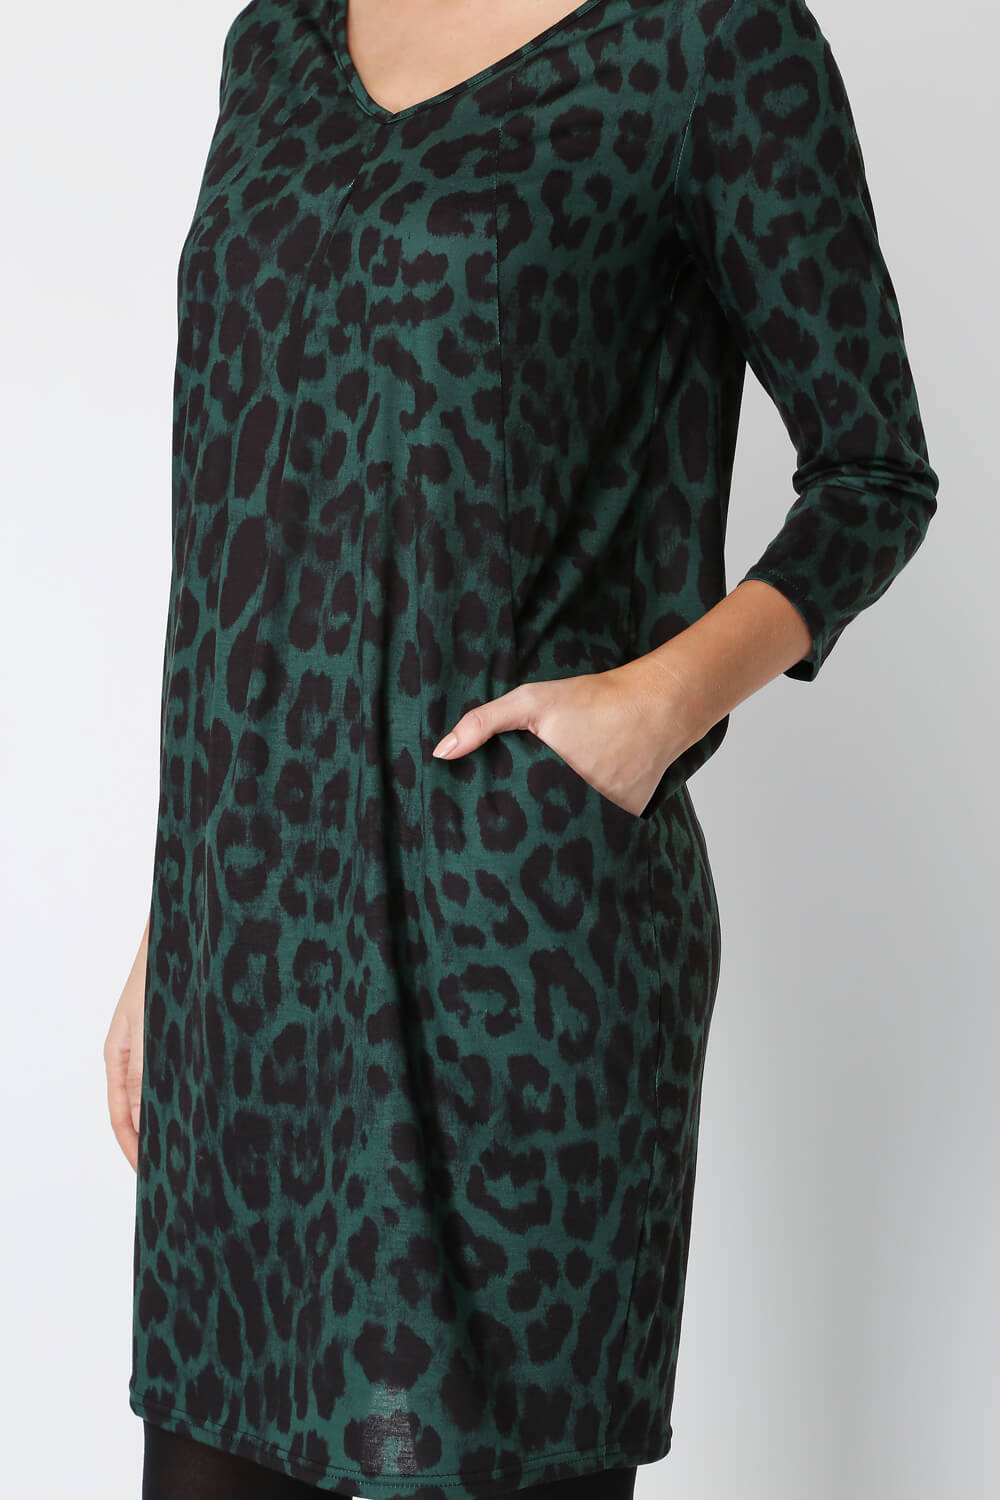 Green Animal Leopard Print Slouch Dress, Image 4 of 5